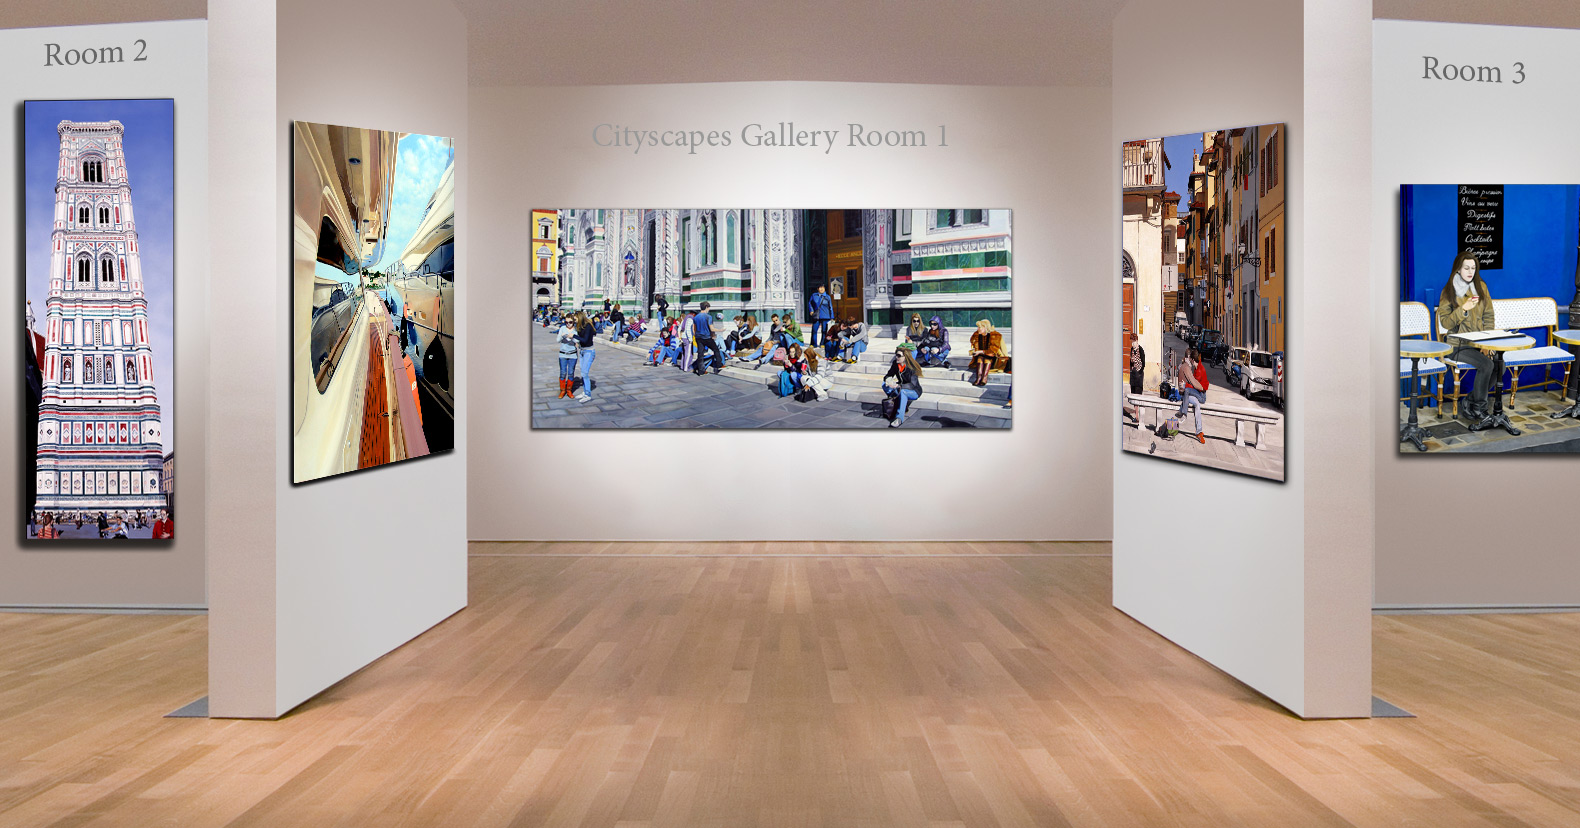 Cityscapes Gallery